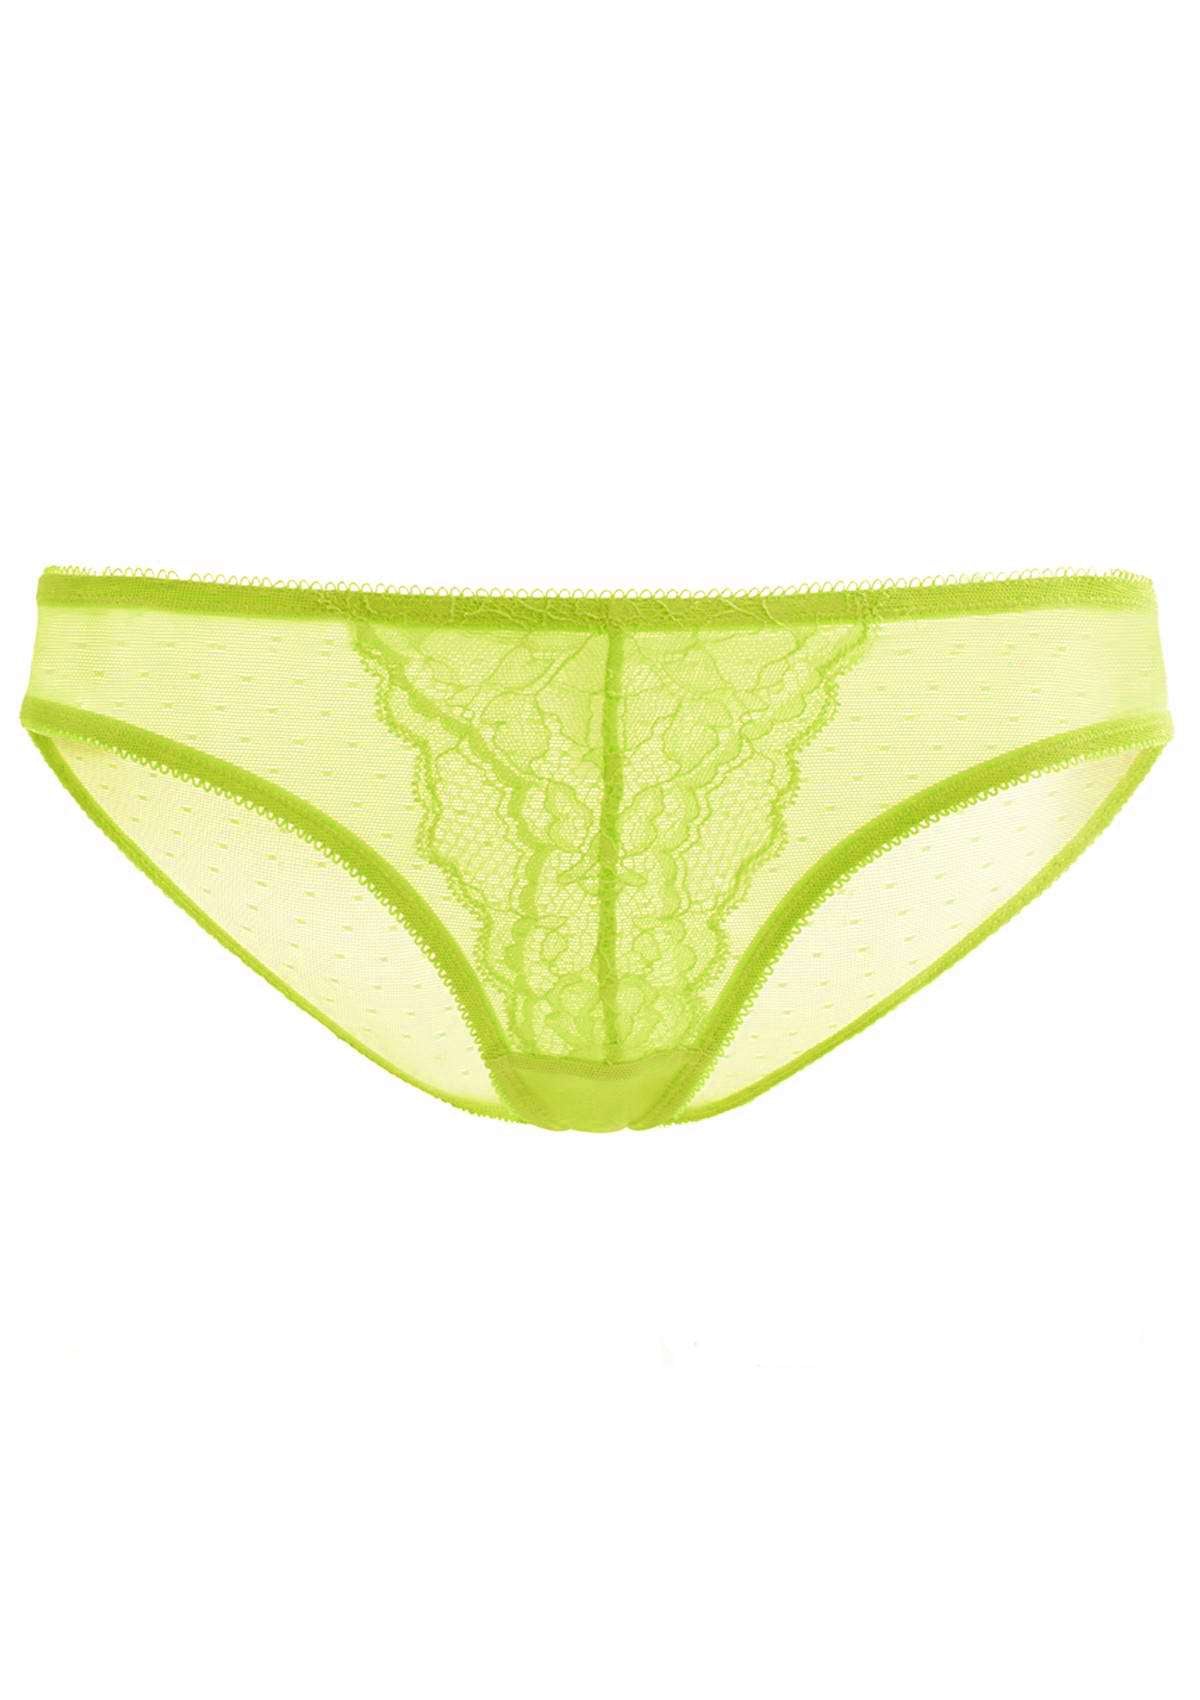 HSIA Enchante Mid-Rise Sheer Lace Mesh Delicate Airy Panty Underwear - M / Lime Green